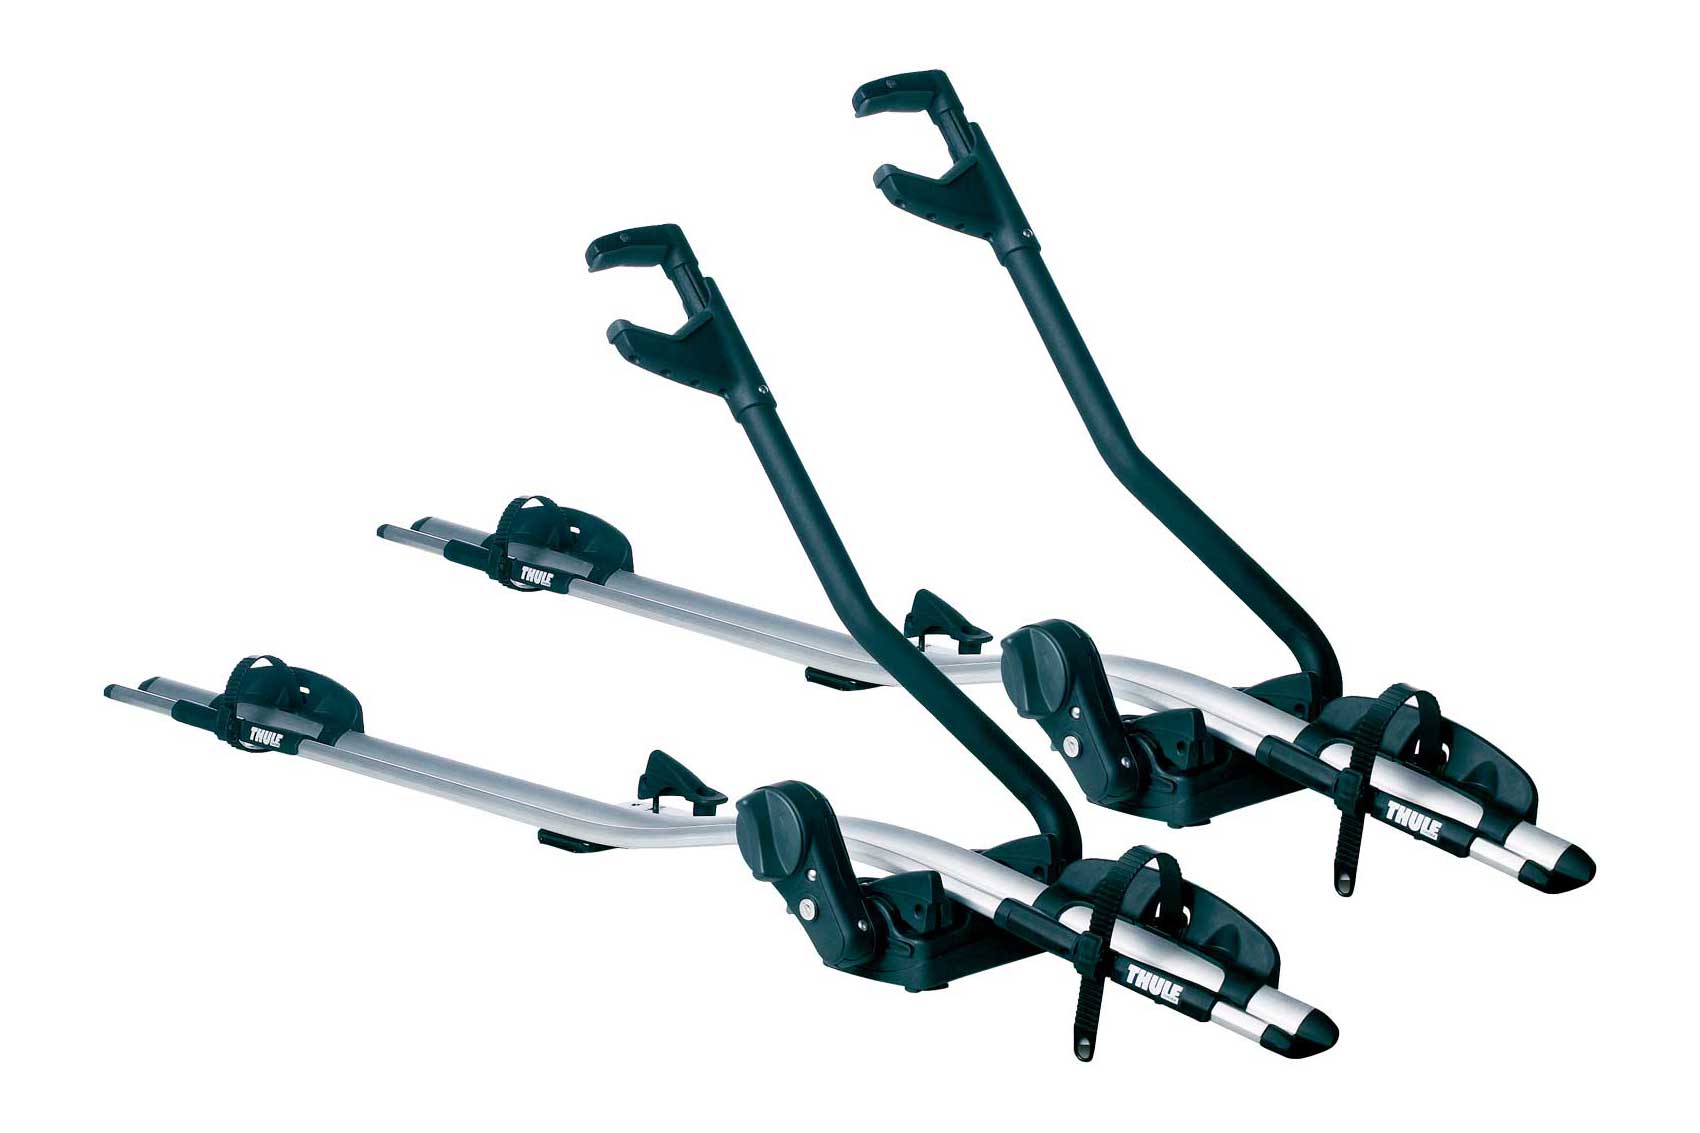 Thule ProRide 591 twin pack roof mounted bike rack for family days out